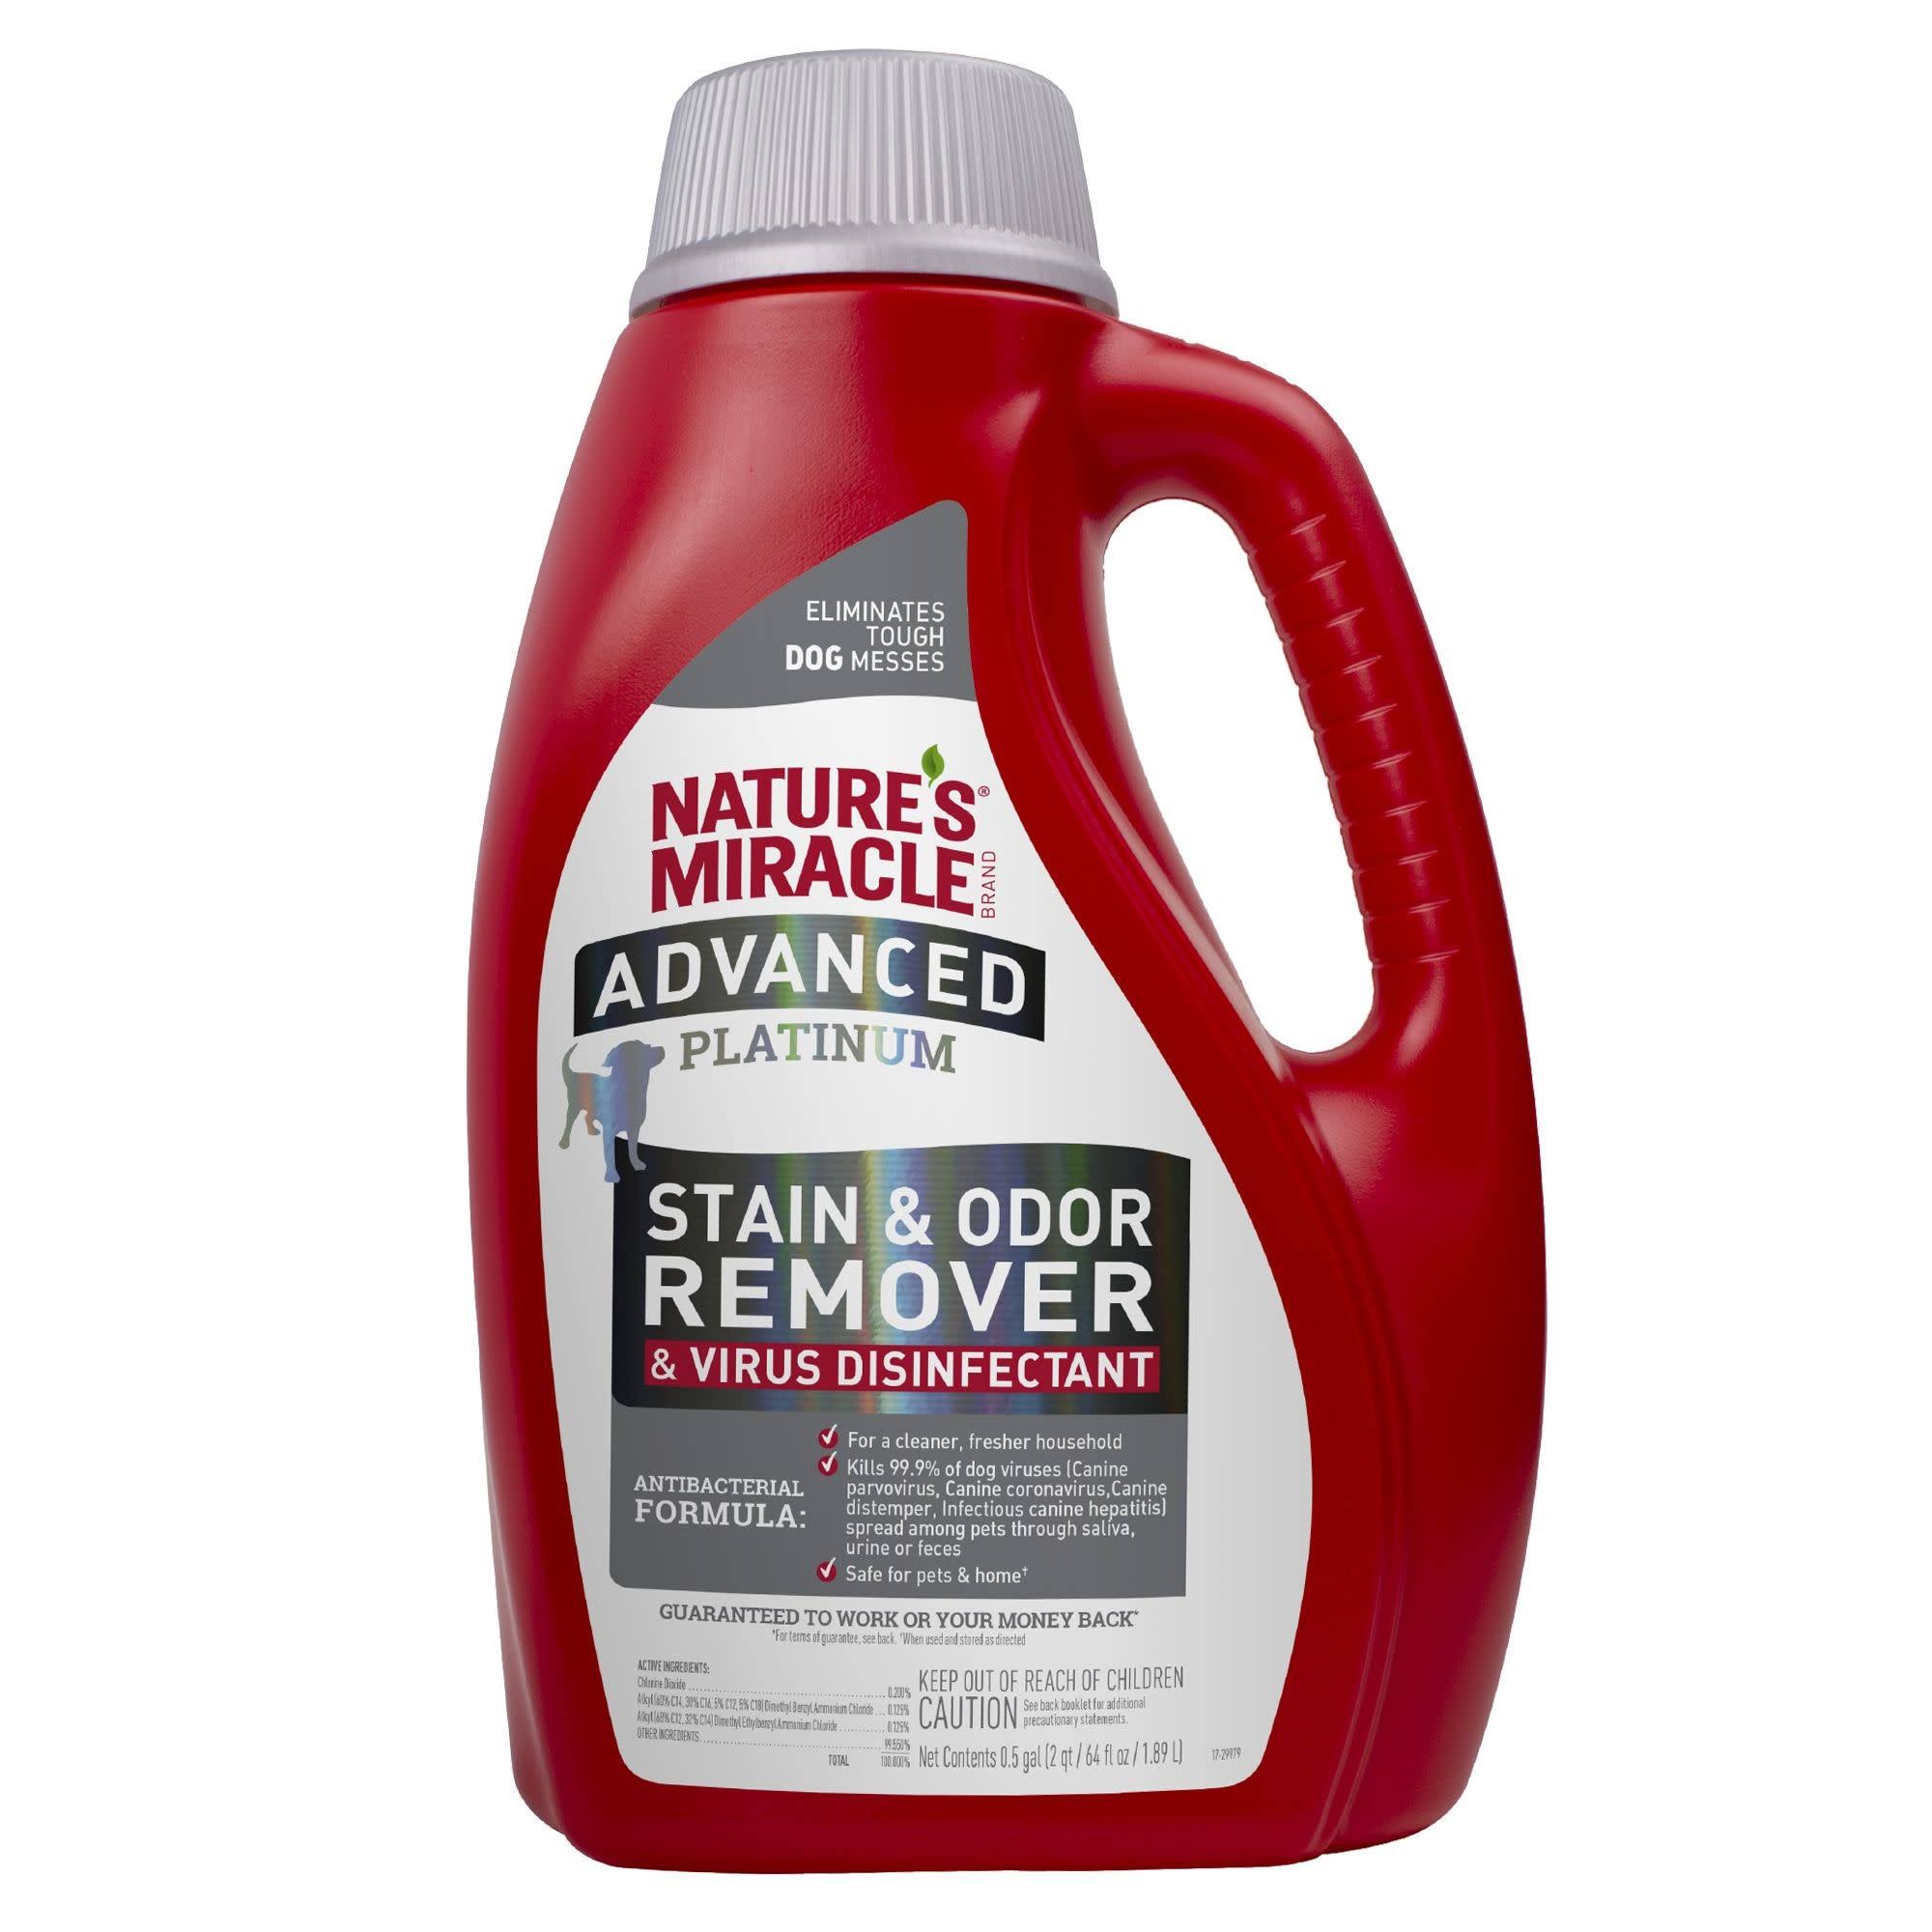 Nature's Miracle Platinum Stain & Odor Remover & Virus Disinfectant